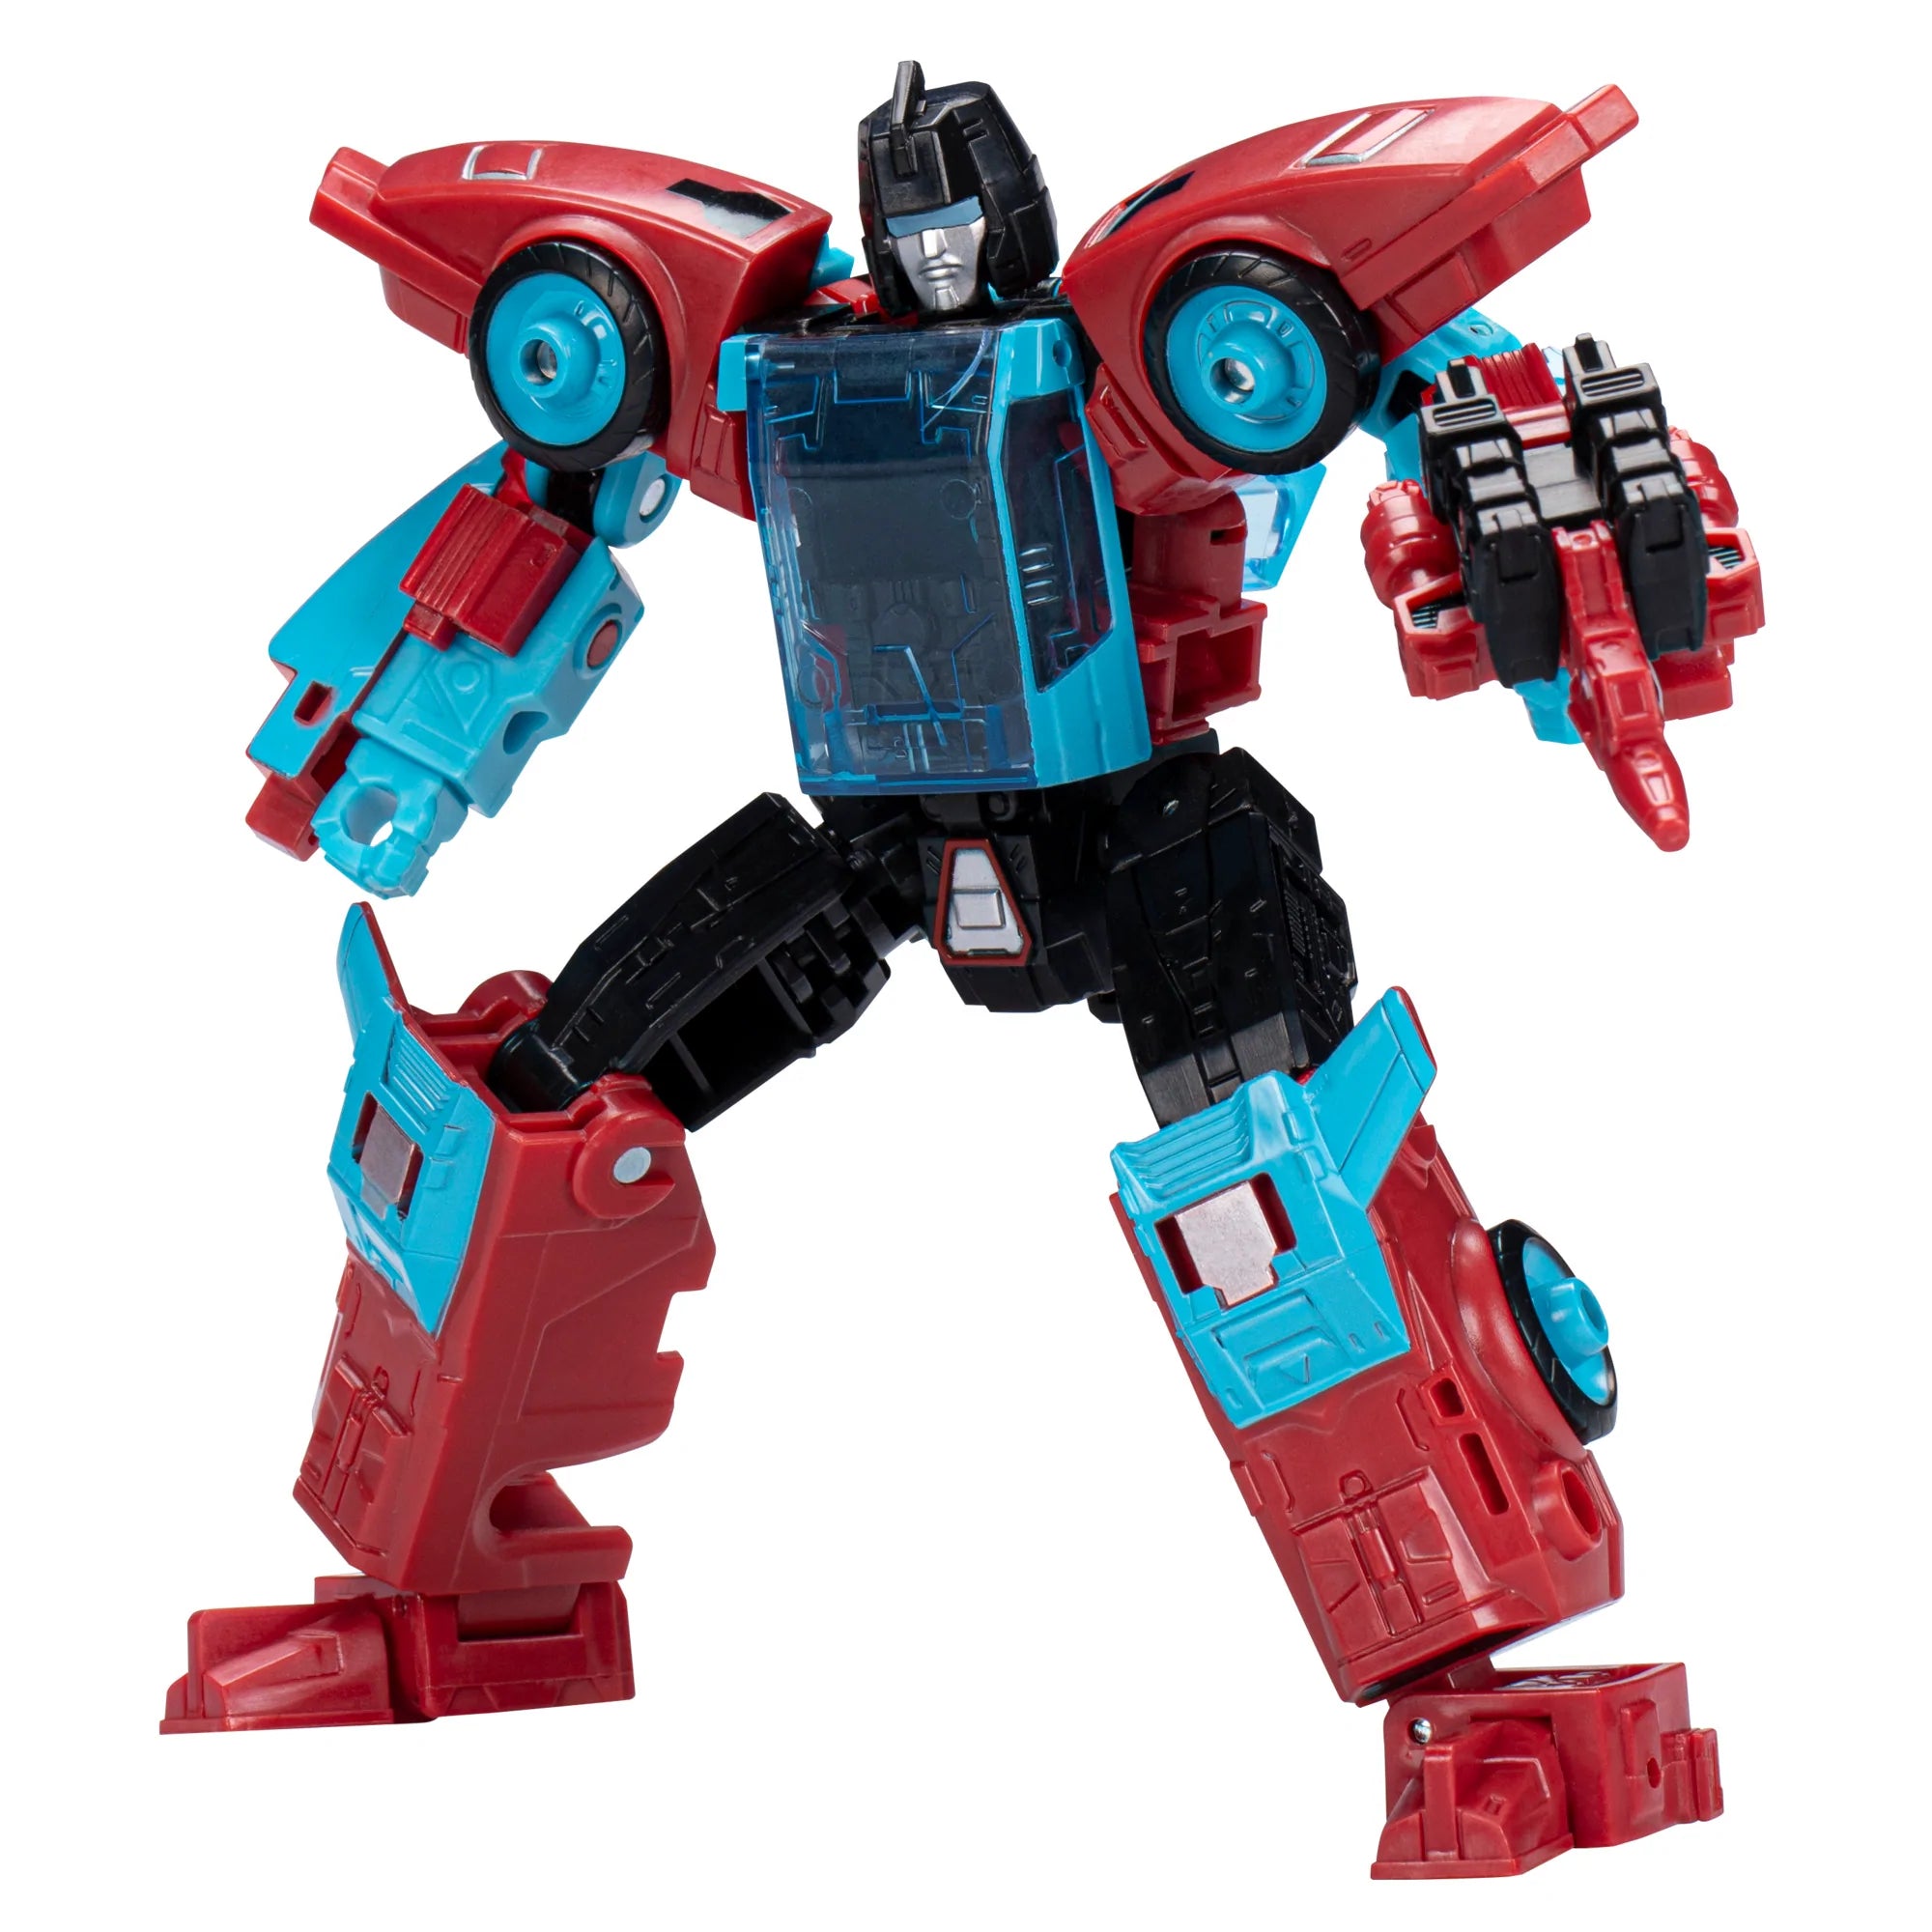 Hasbro - Transformers Generations Legacy - Deluxe Wave 3 - Autobot Pointblank & Peacemaker